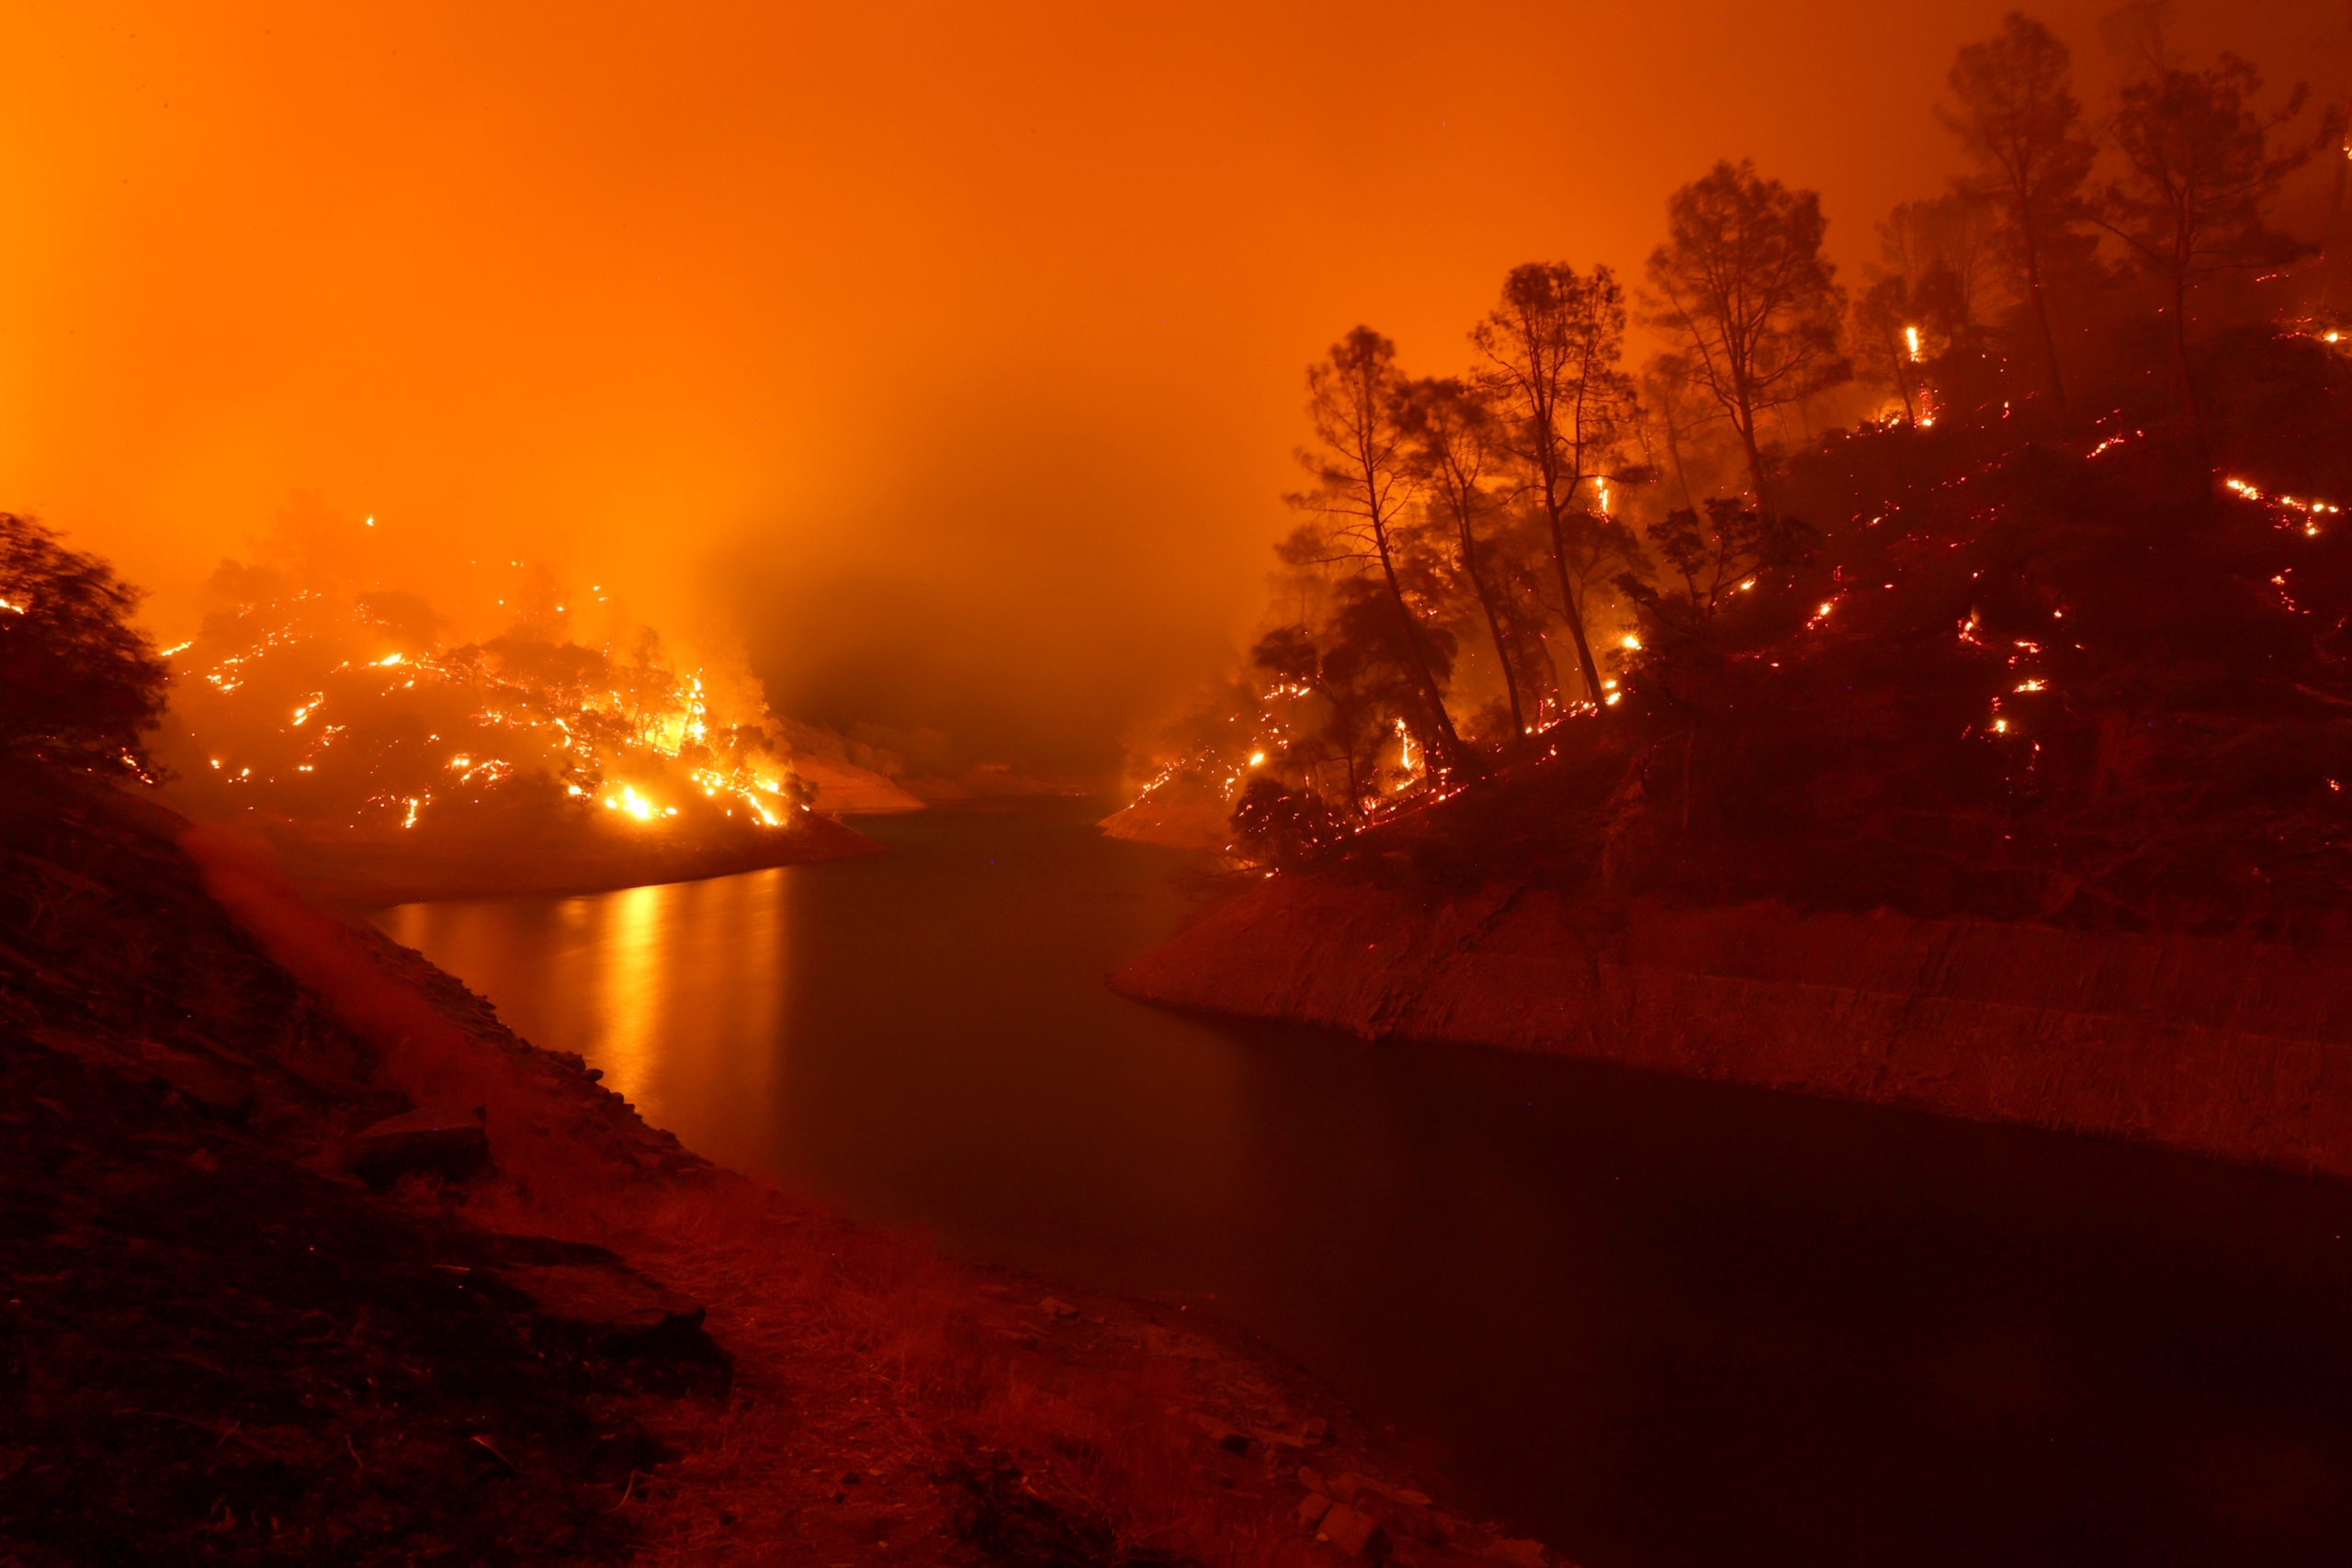 The banks around Lake Berryessa smolder after the LNU Lightning Complex Fire burned through the area on August 18, 2020 in Napa, California.  (Photo: Justin Sullivan, Getty Images)